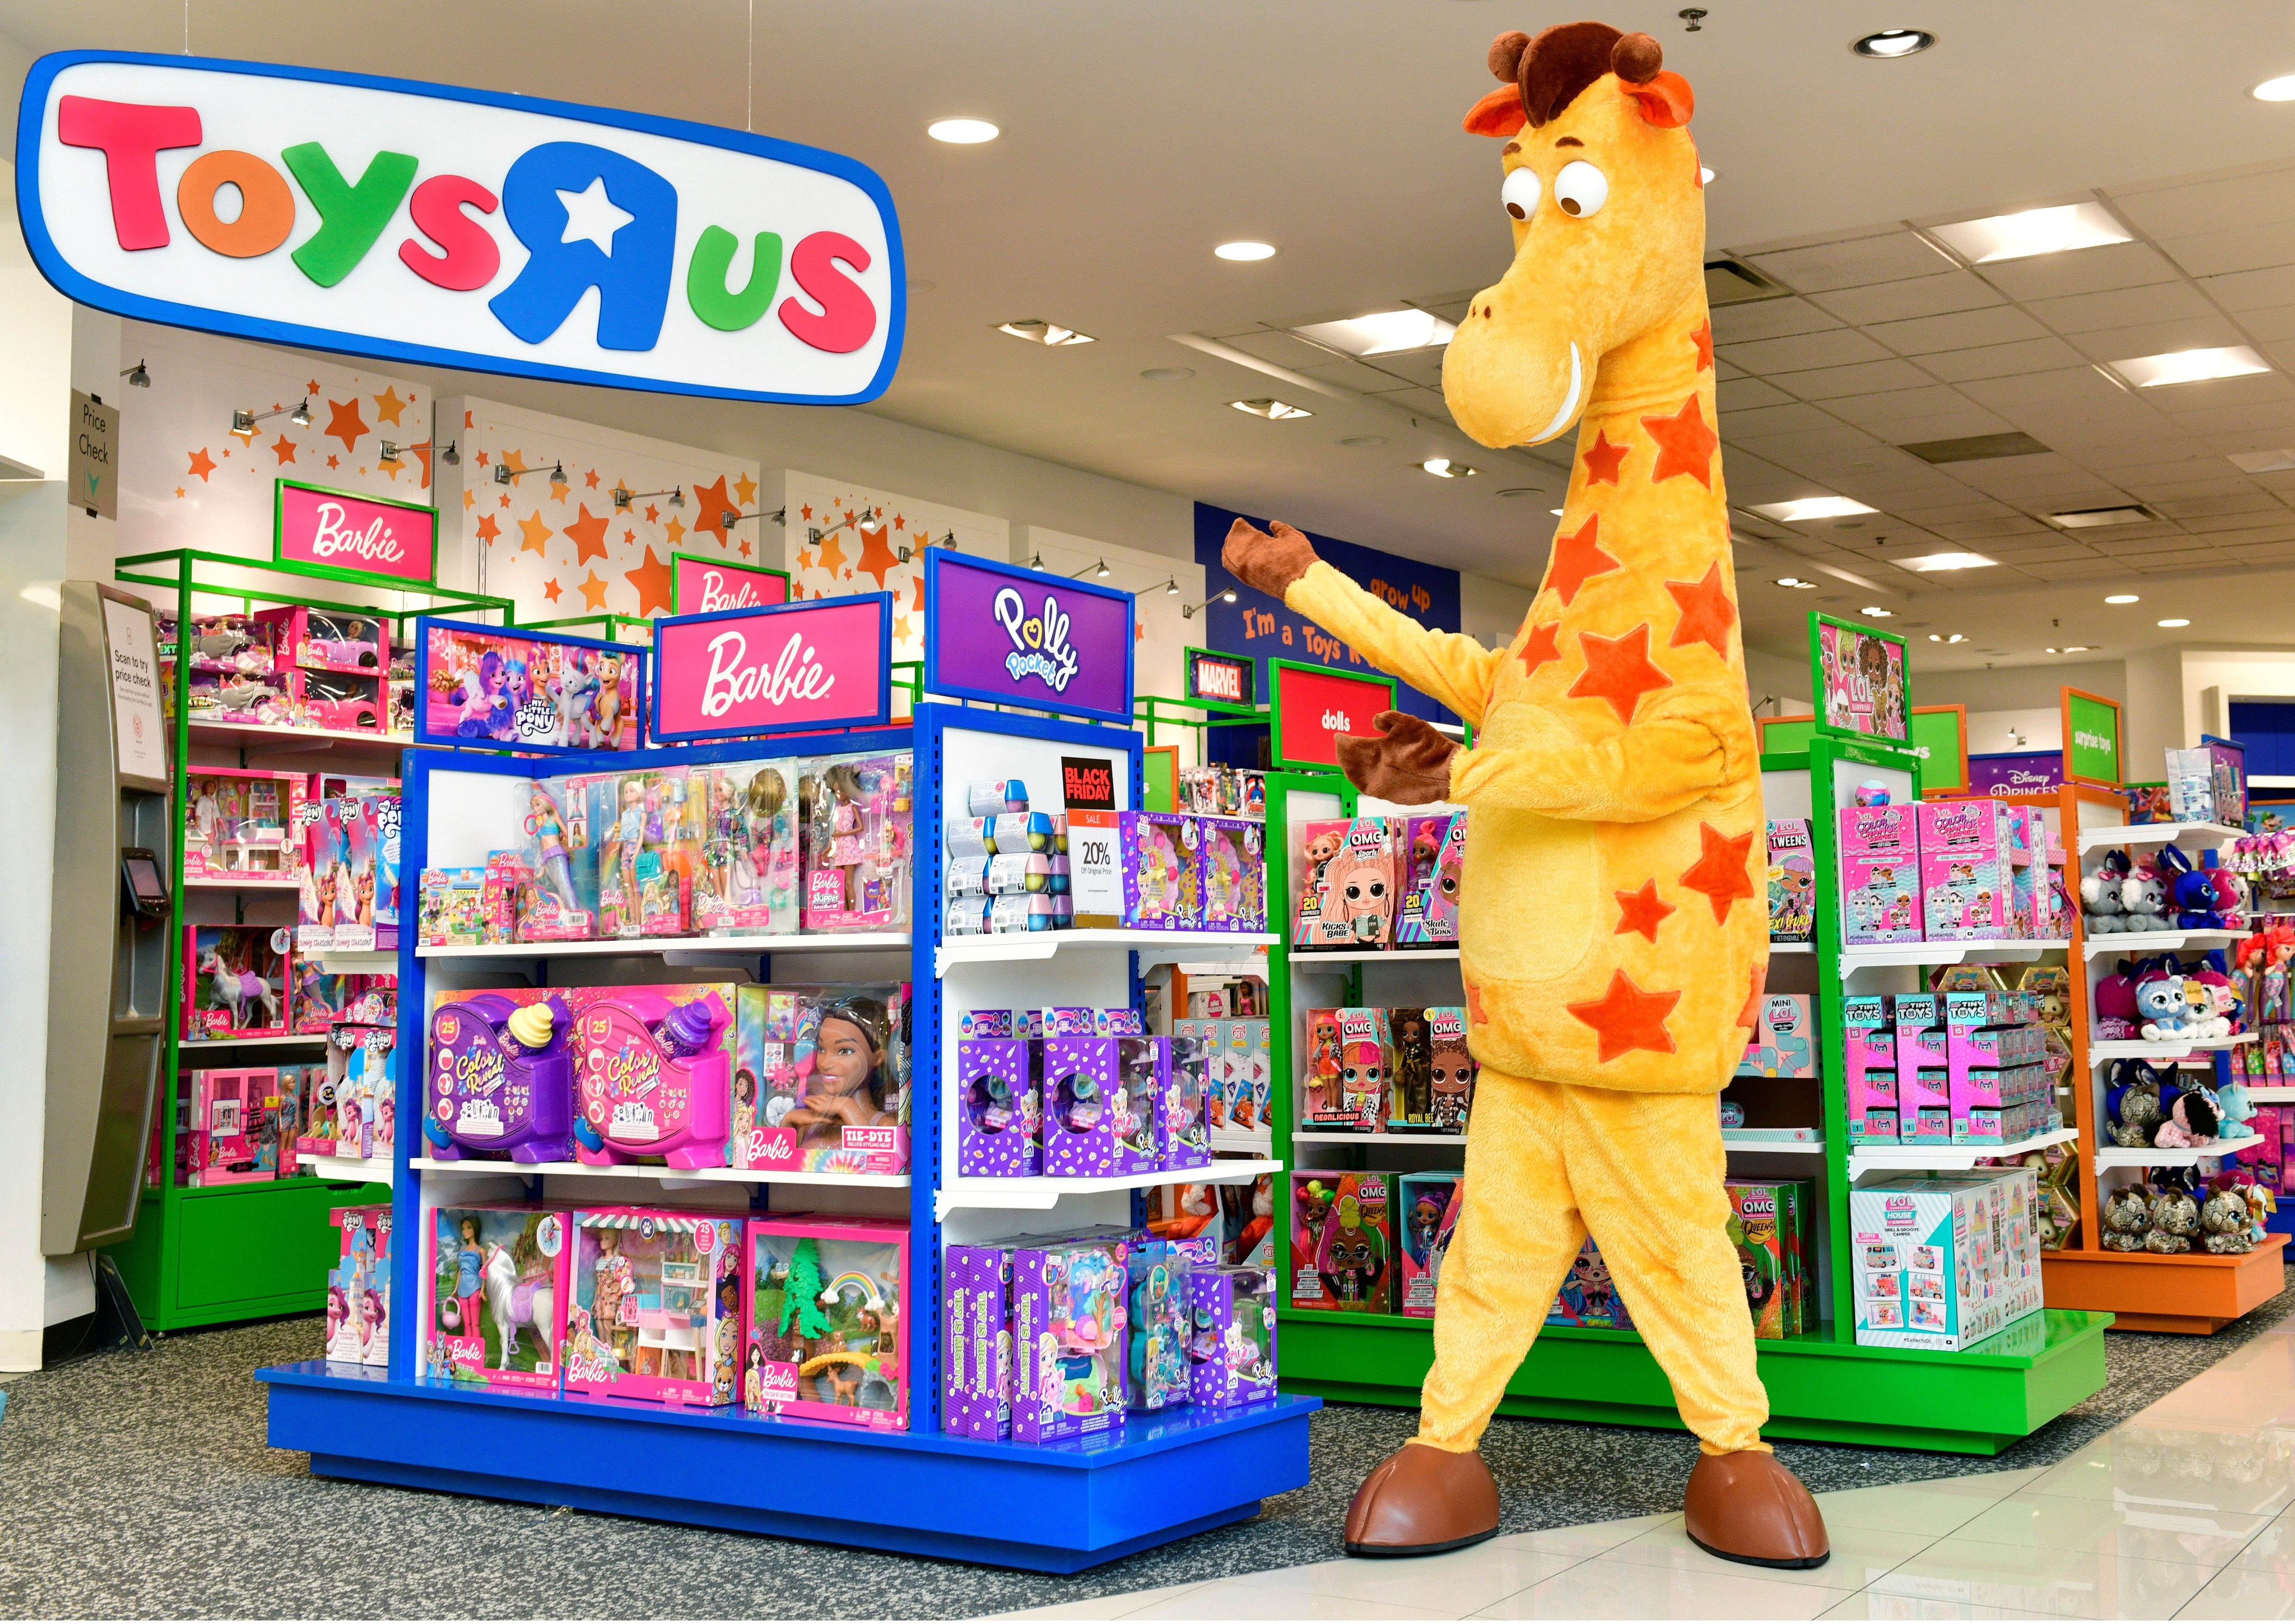 16 New Toys R Us S To Open In